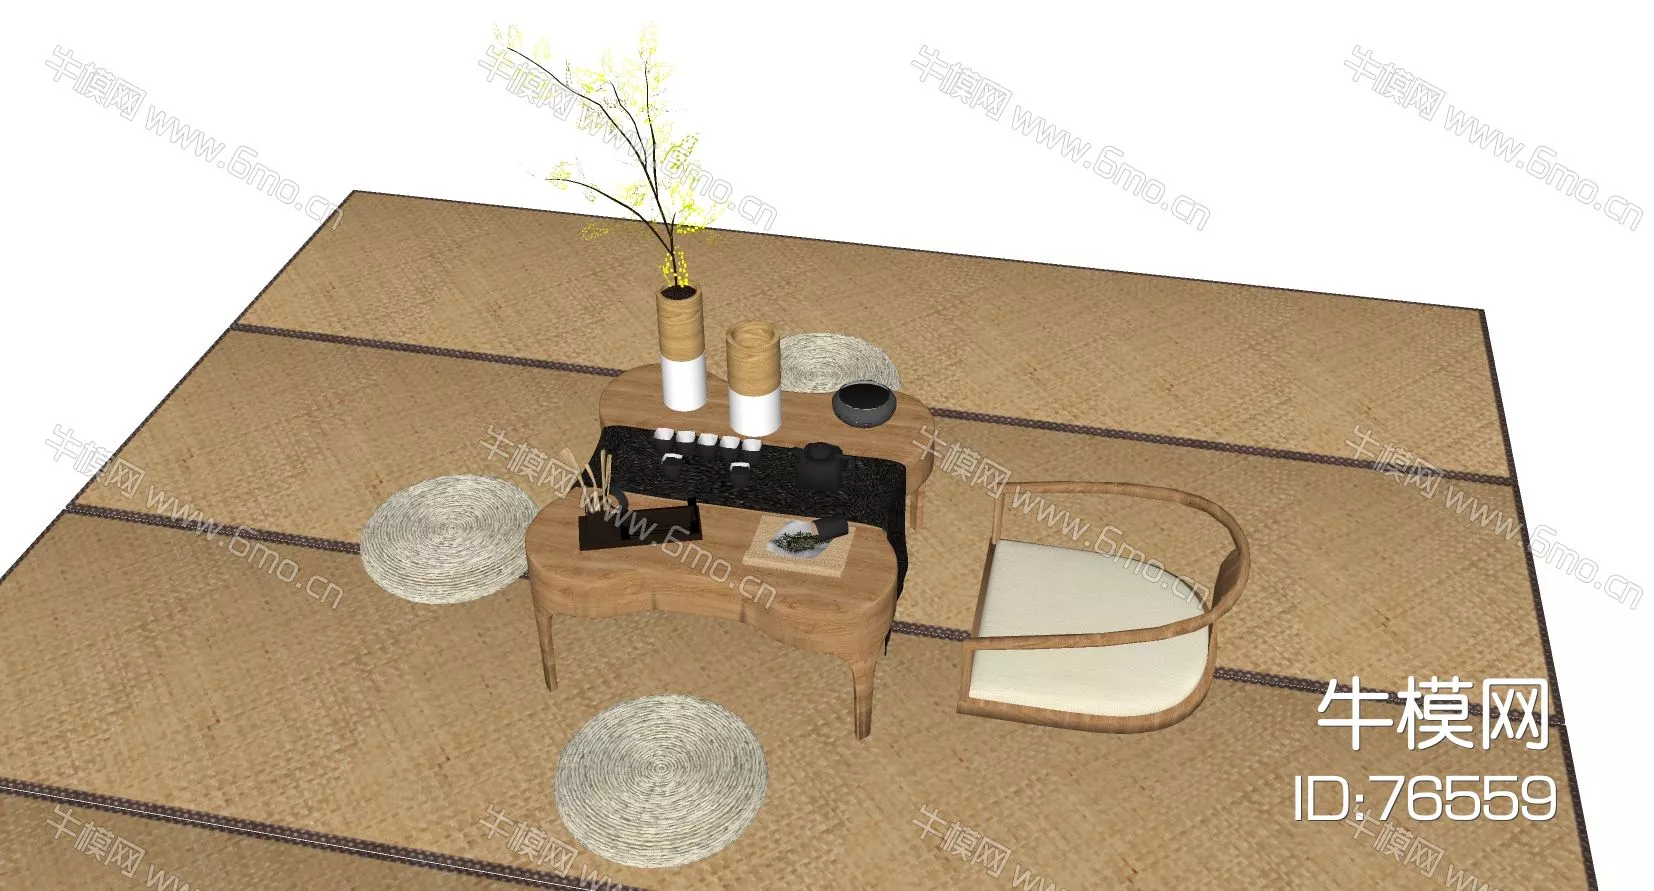 JAPANESE COFFEE TABLE - SKETCHUP 3D MODEL - ENSCAPE - 76559